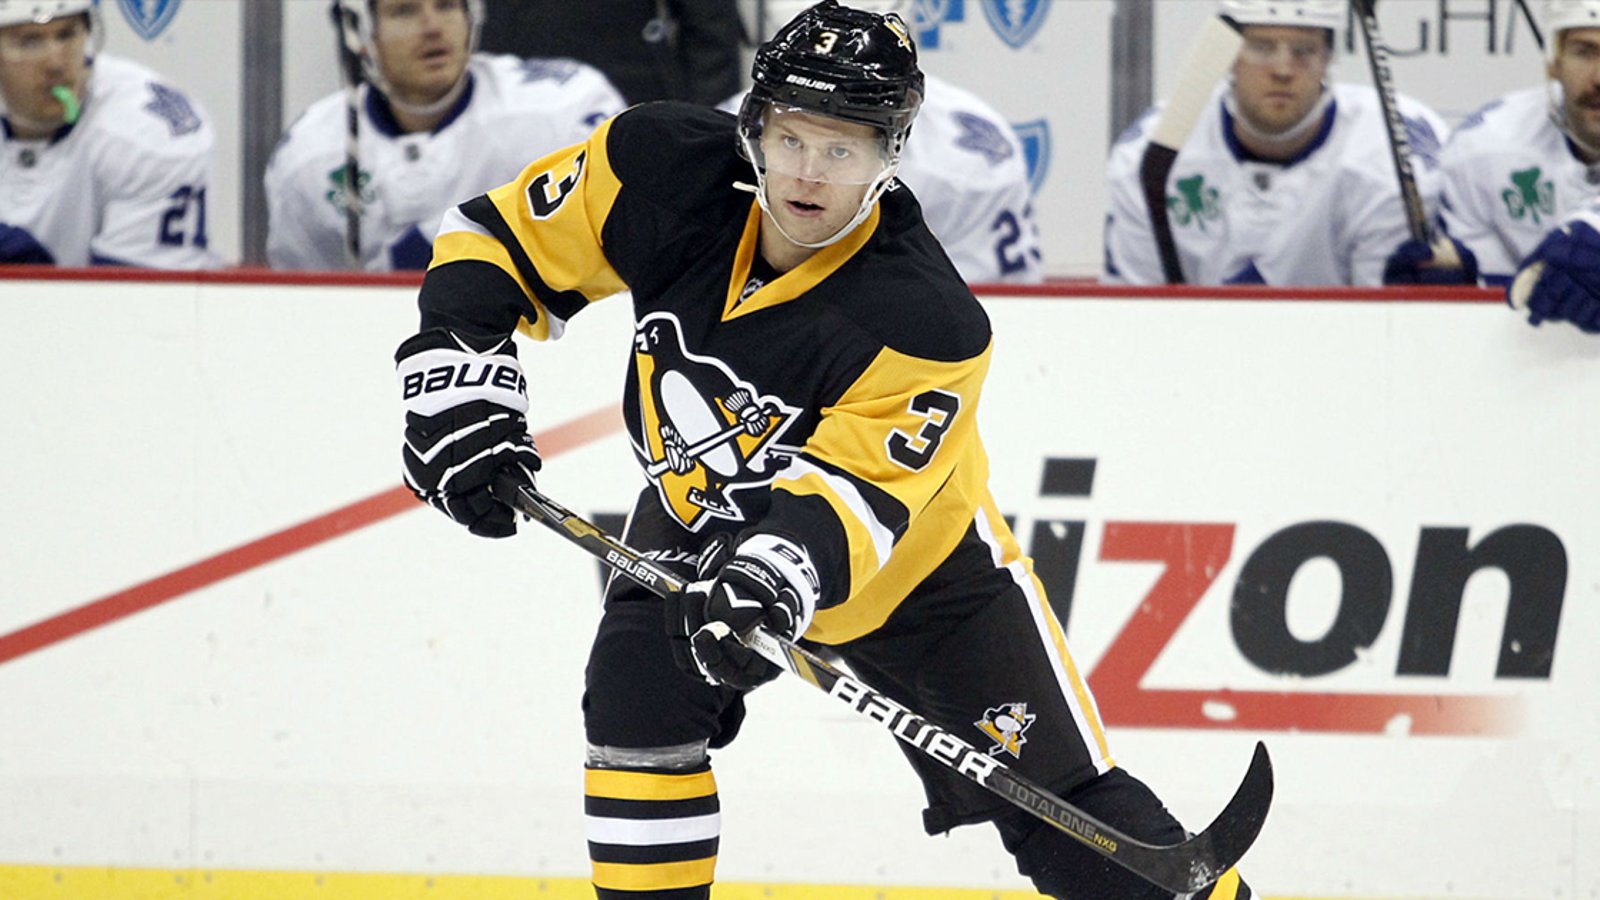 Injury Report: More bad news for the Pens blue line